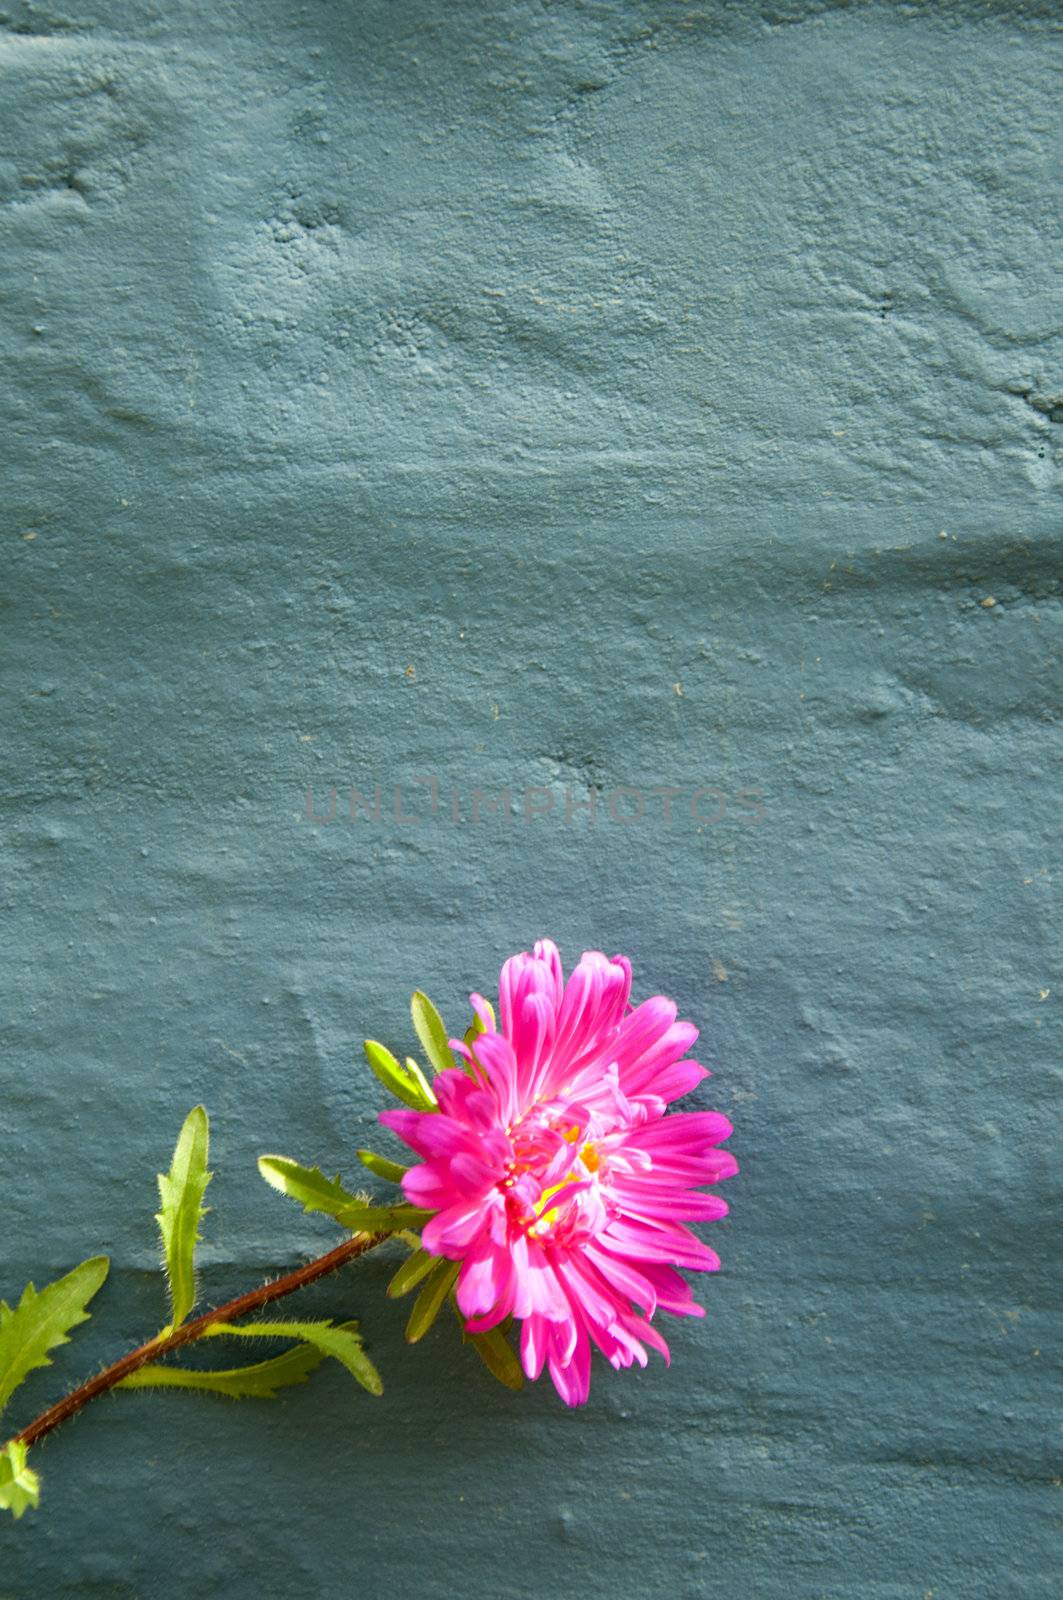 A Pink Aster by kdreams02